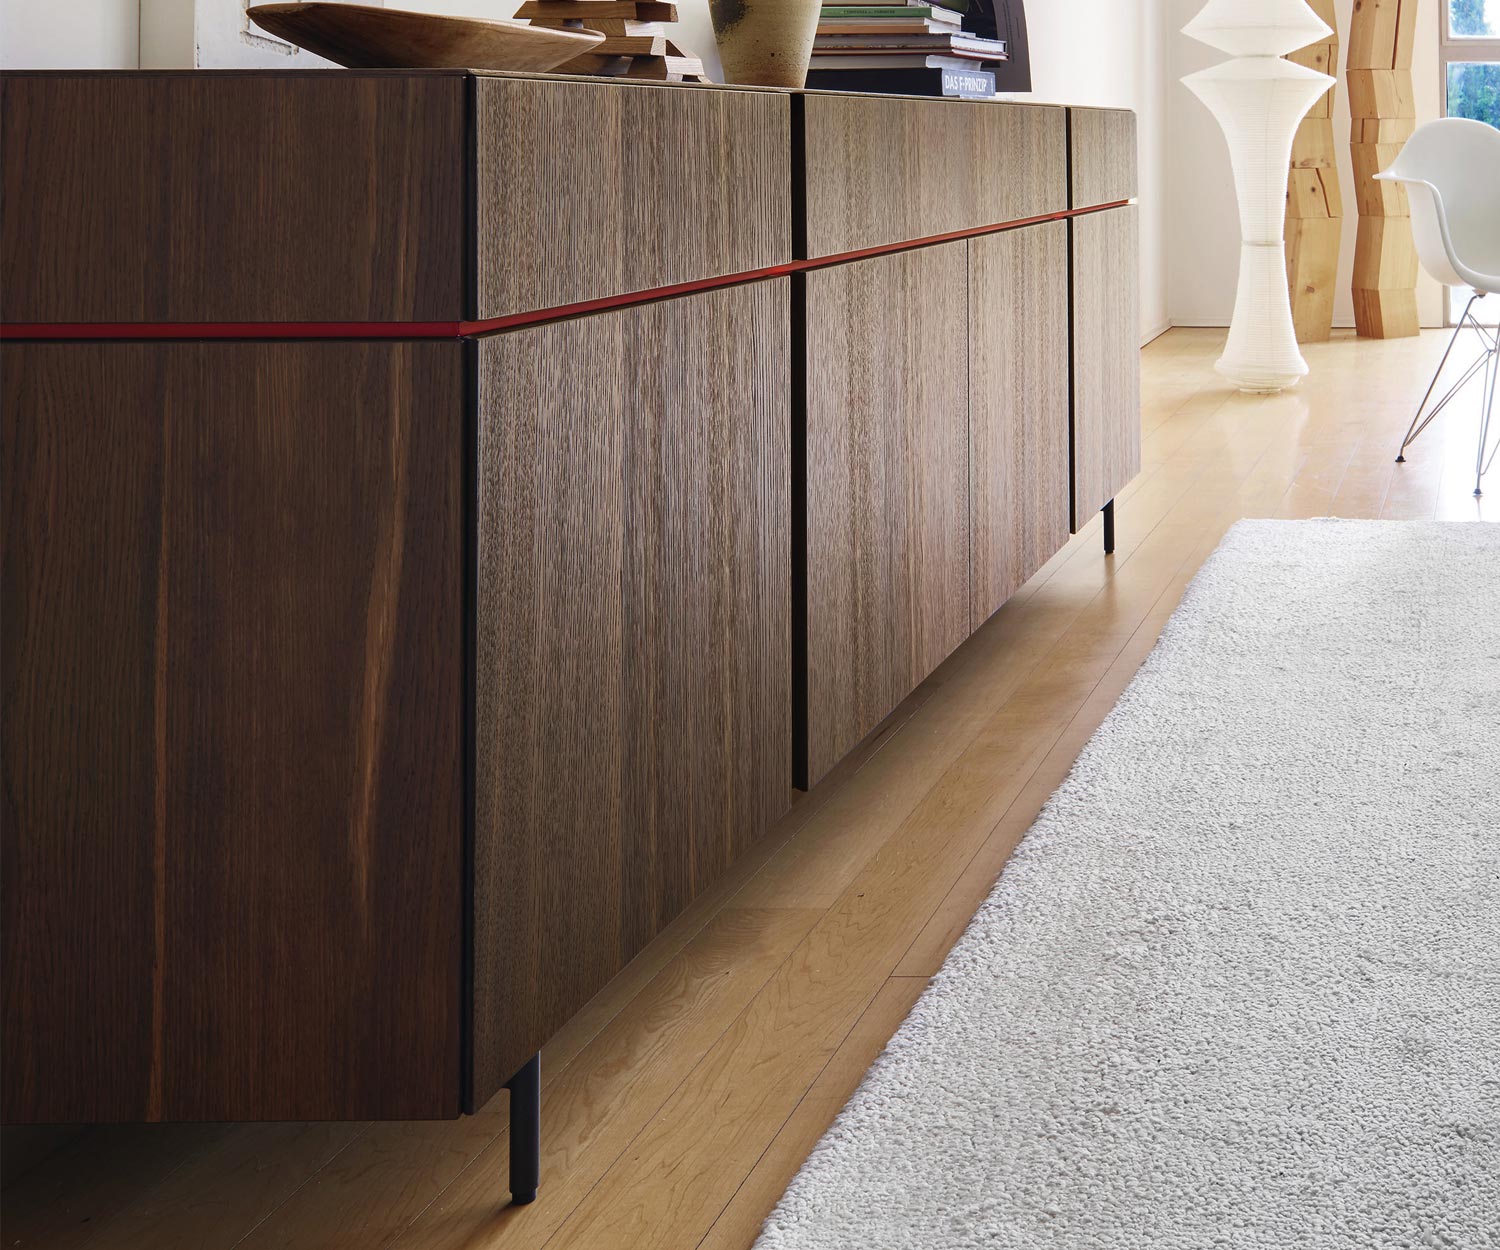 High-quality Livitalia Abaco design sideboard in brown oak side front